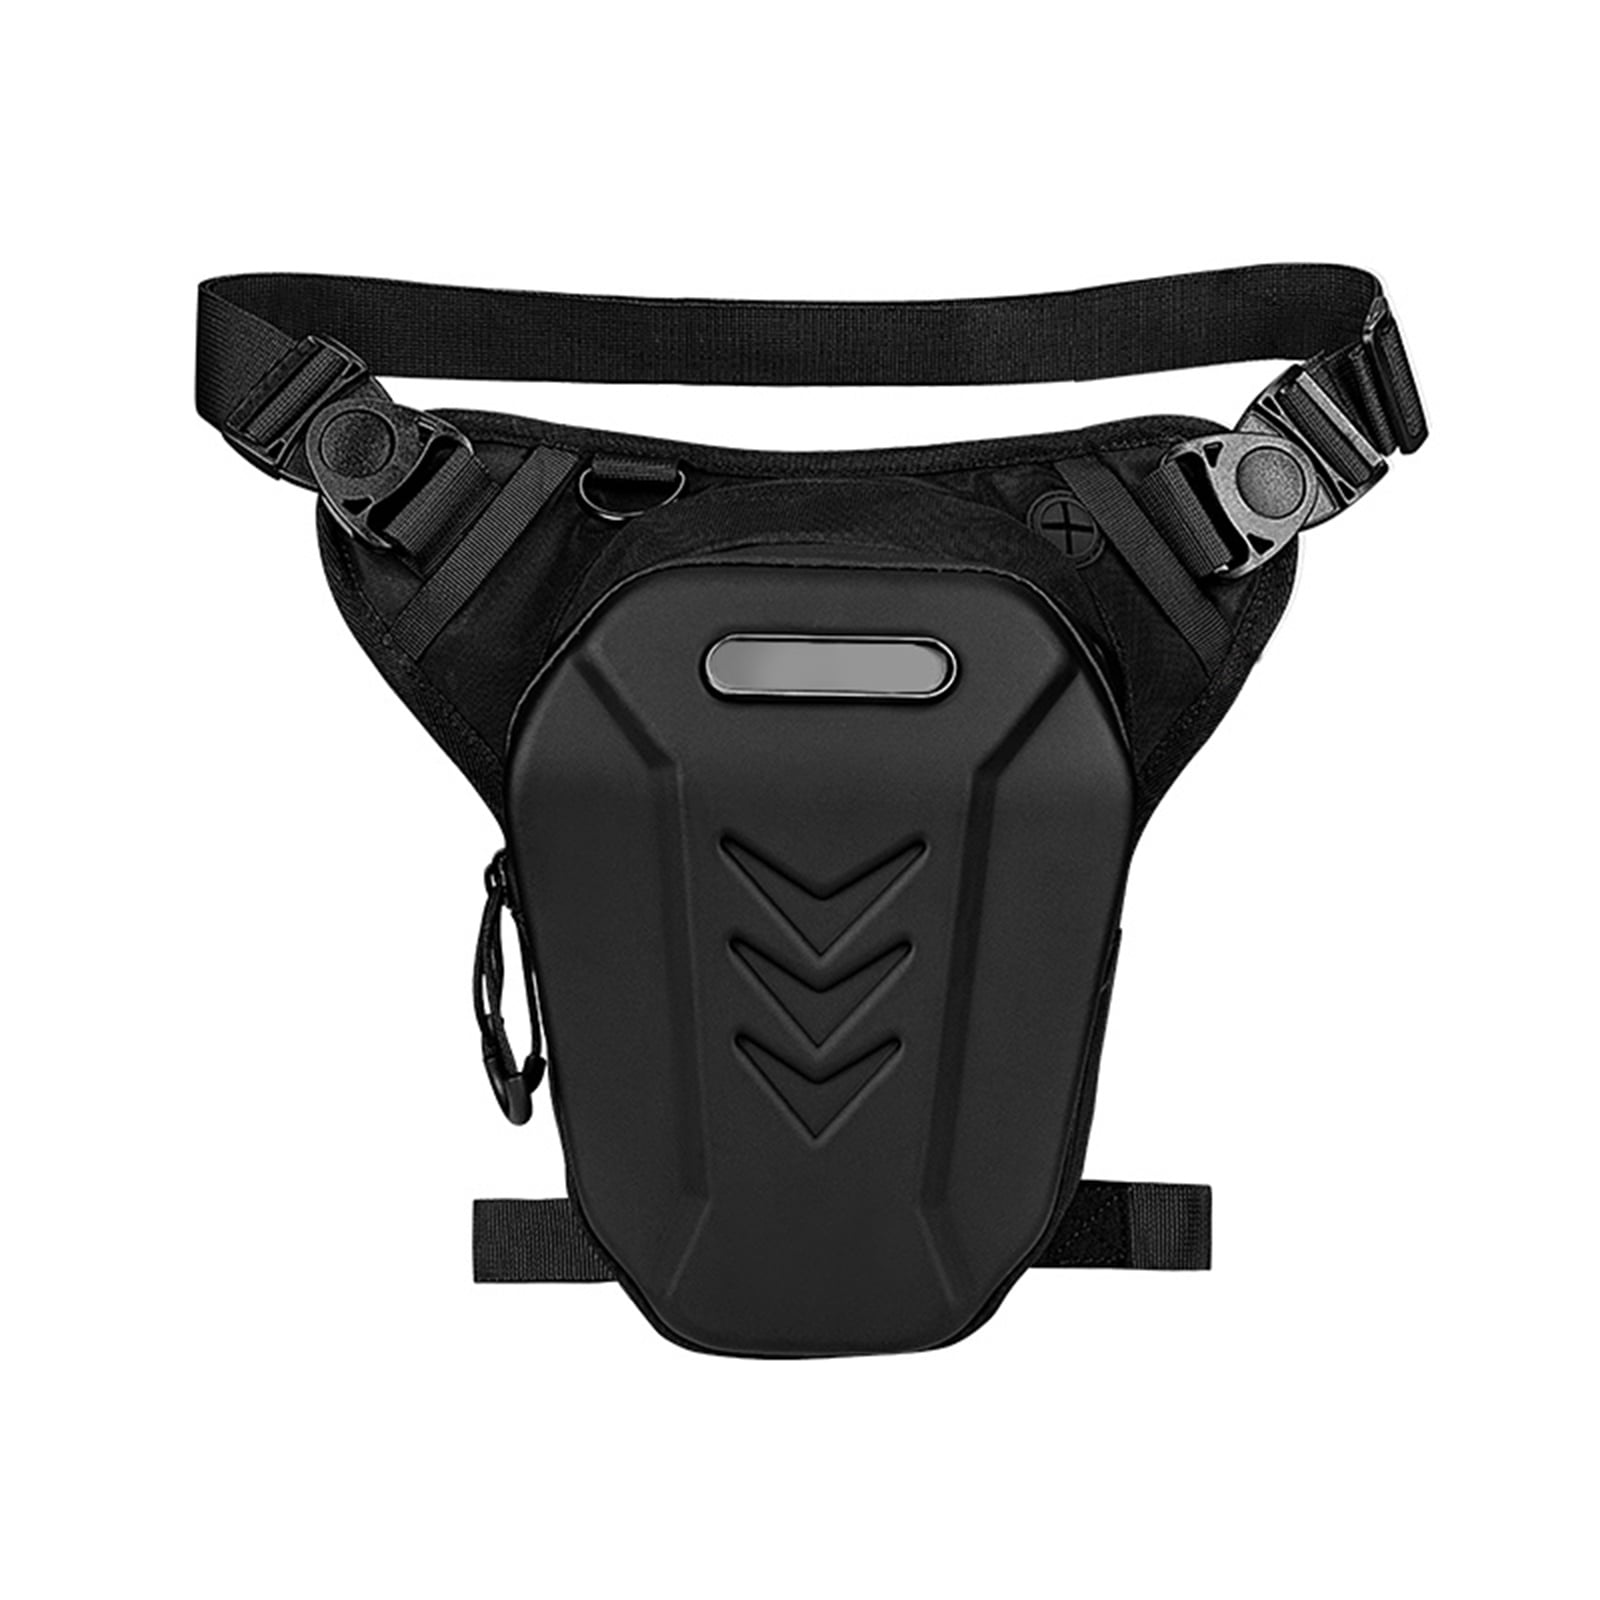 Motorcycle Leg Bag, Waterproof Hard Shell Waist Pack for Travel and ...